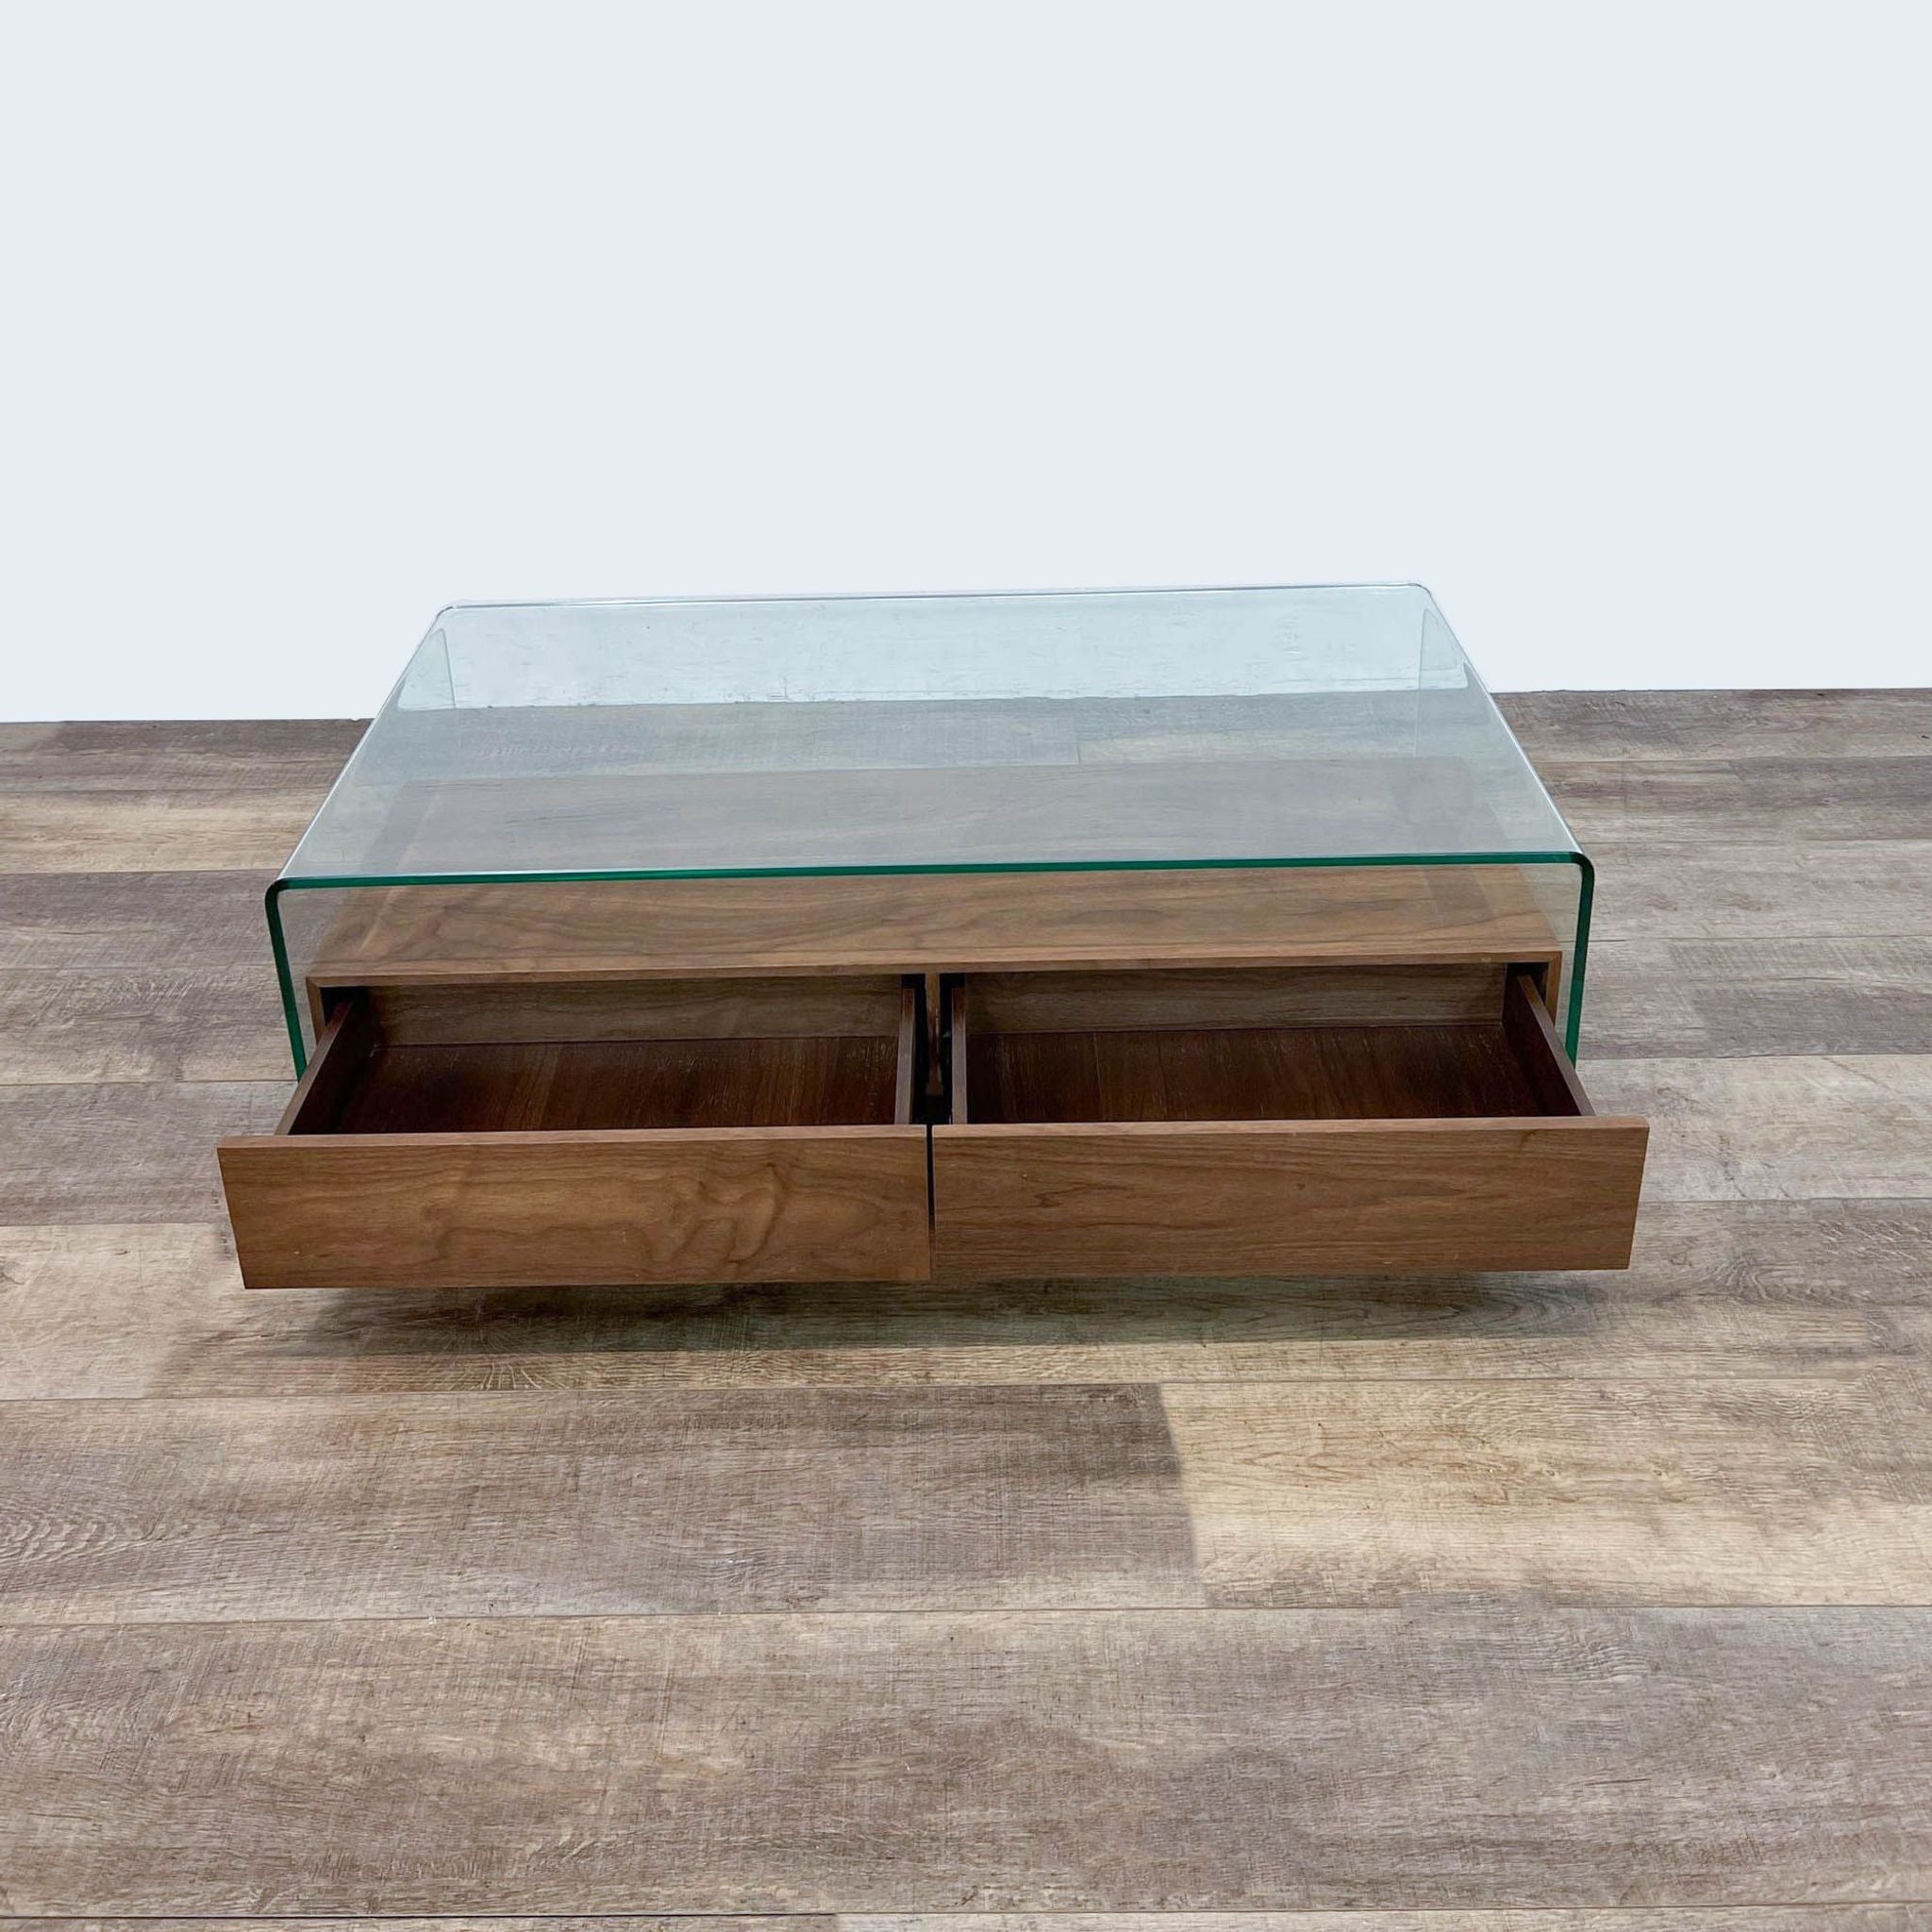 2. Modern glass coffee table by Zuo with open walnut drawers showcasing storage space, placed on a wooden floor.